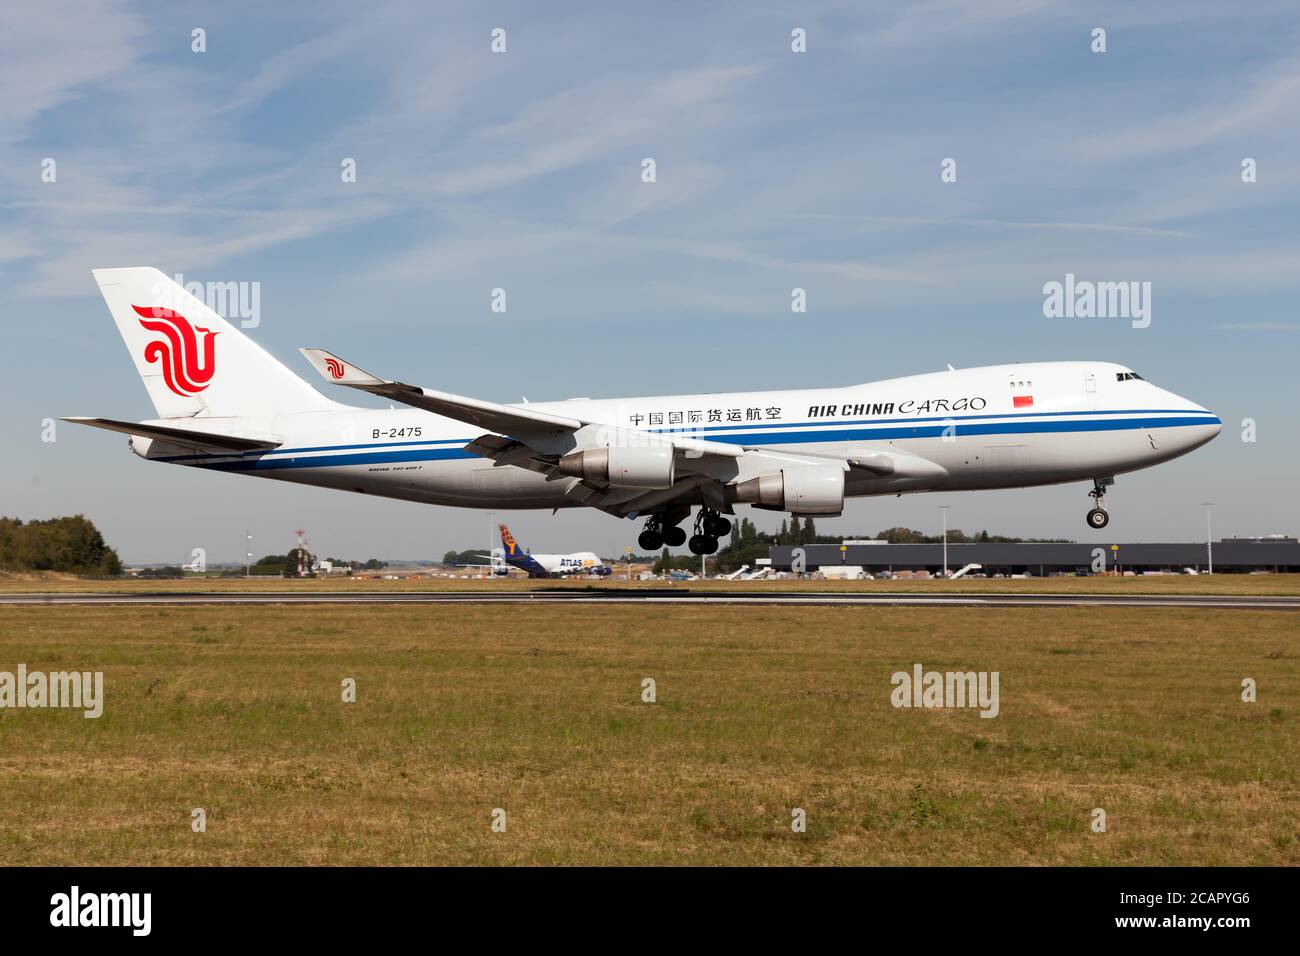 Liege, Belgium. 30th July, 2020. An Air China Cargo Boeing 747-400 freighter landing at Liege Bierset Airport. Credit: Fabrizio Gandolfo/SOPA Images/ZUMA Wire/Alamy Live News Stock Photo